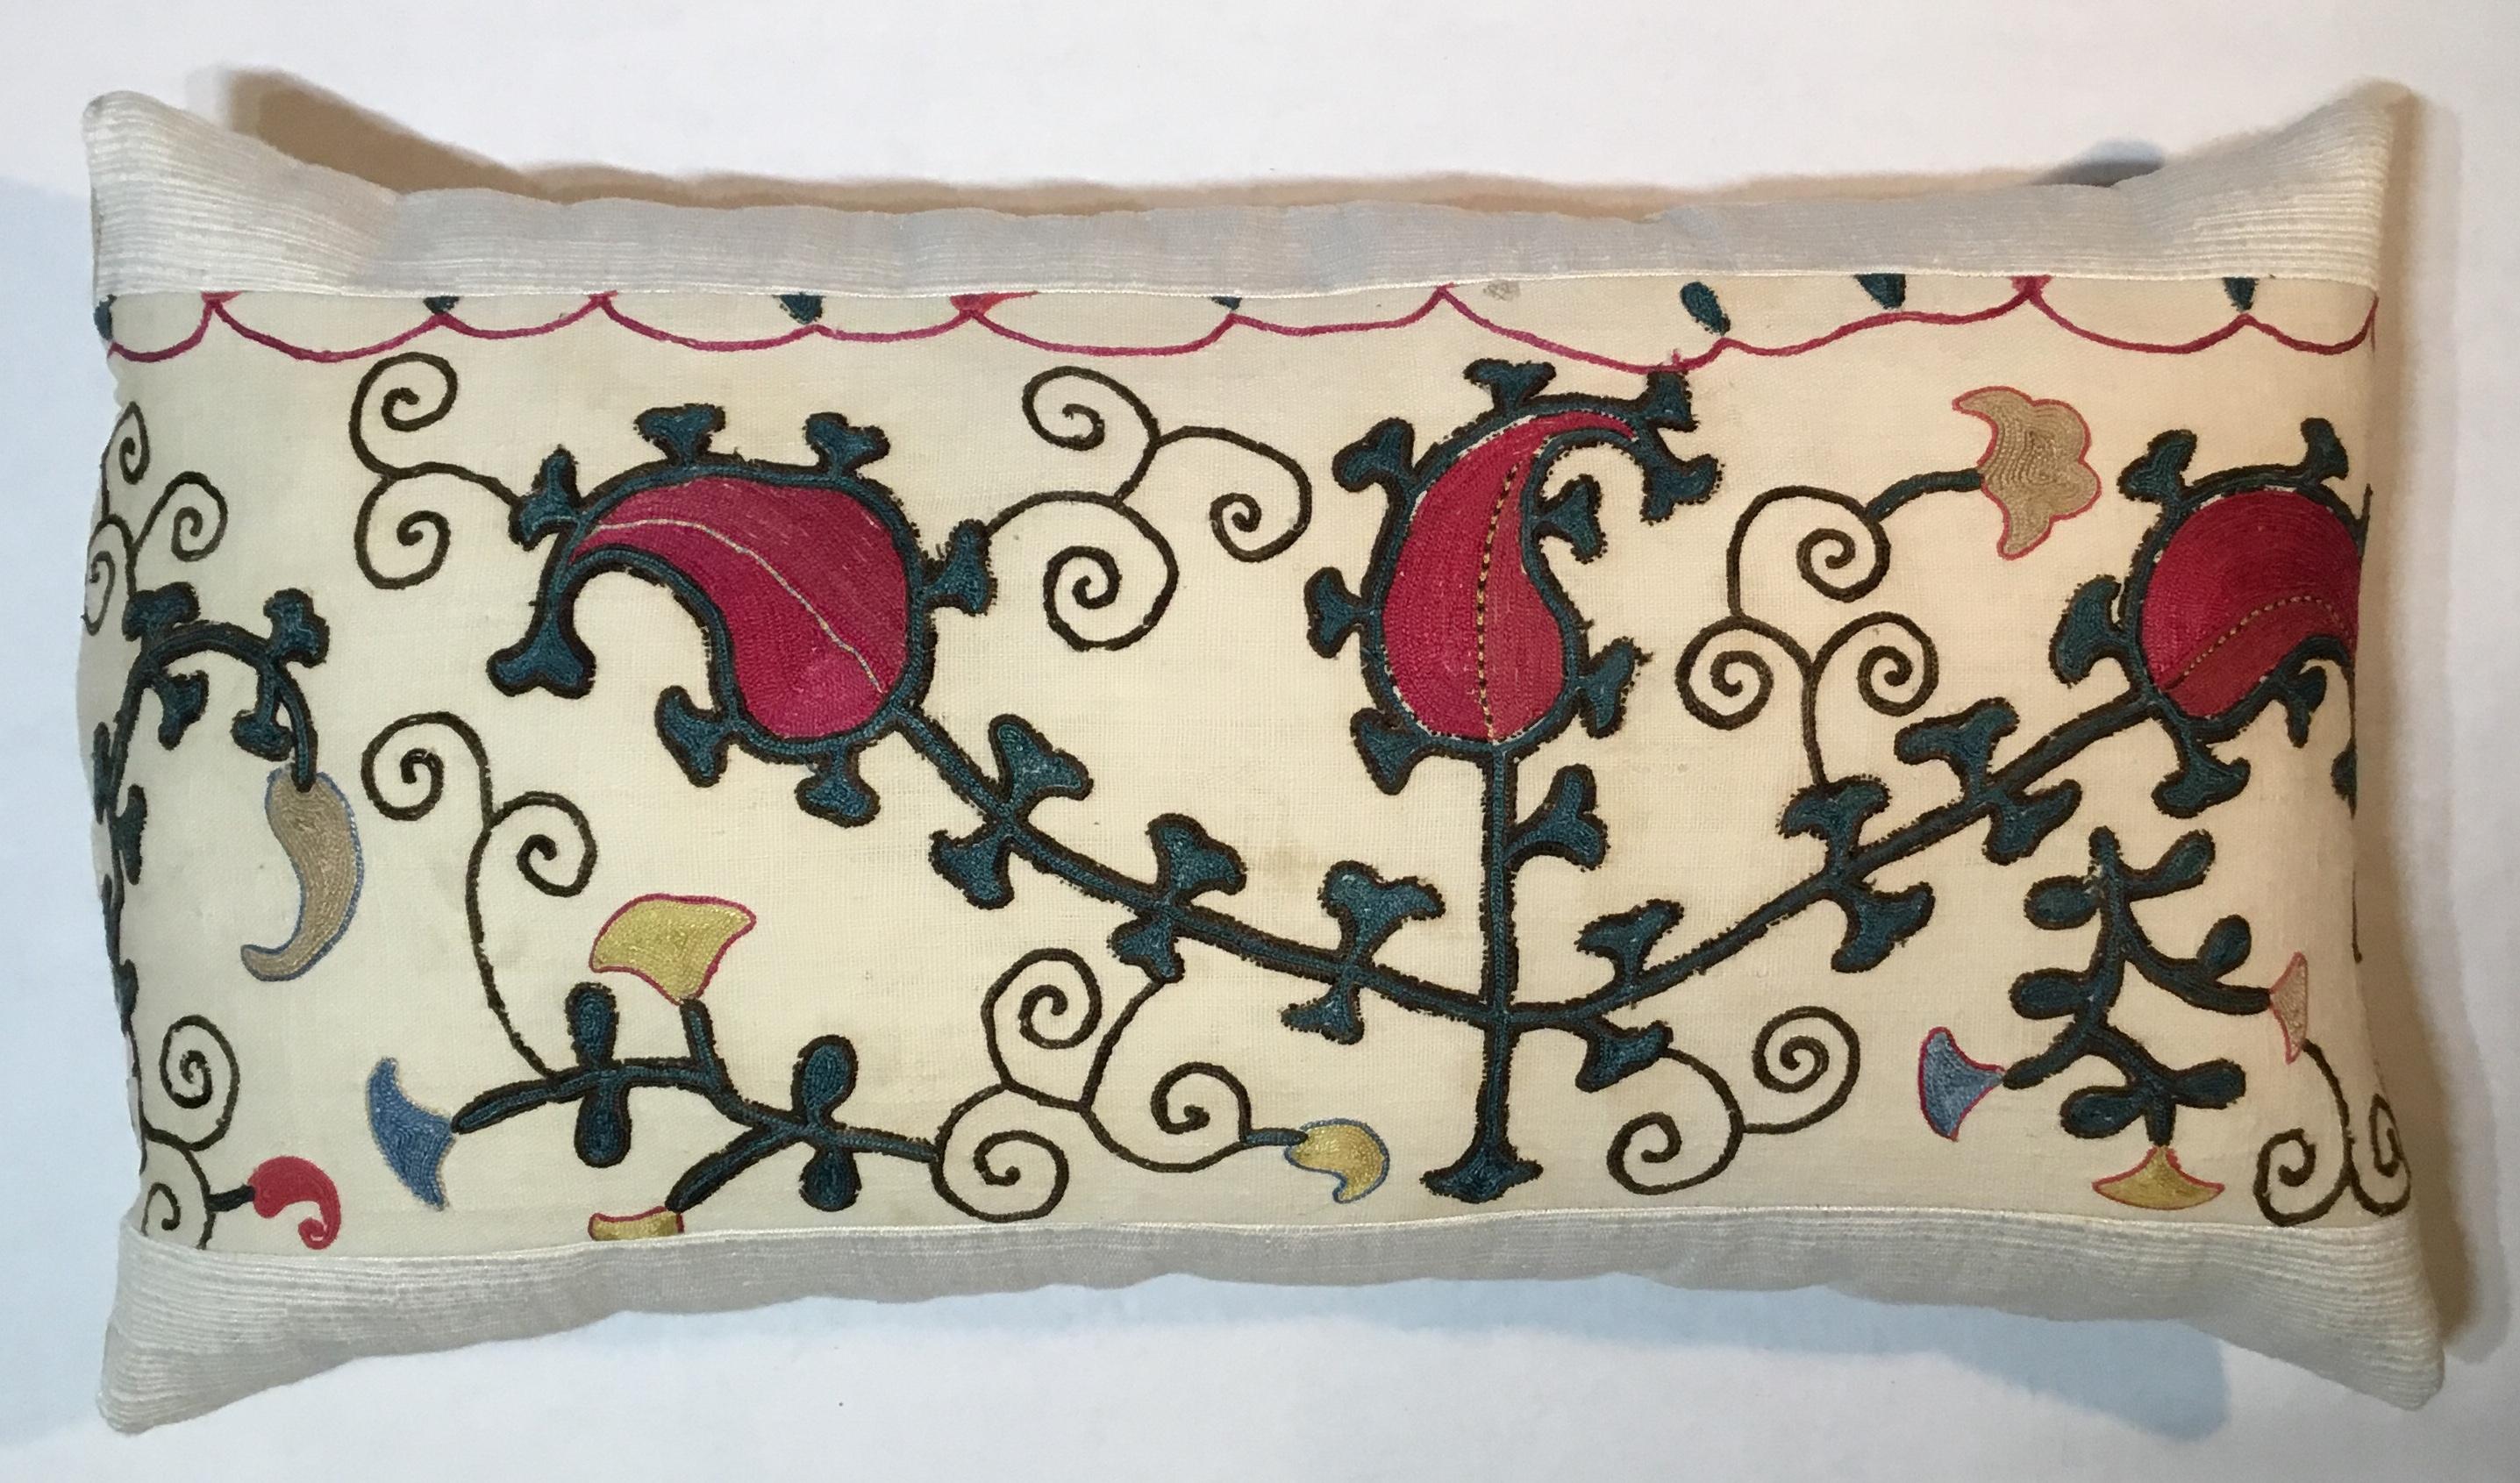 Beautiful pillow made of hand embroidery silk of vines and flowers, on cream color hand loom
Background, quality cotton side trimmings and fine backing. New insert.
Some oxidation of silk due the age of the textile. Structurally very good